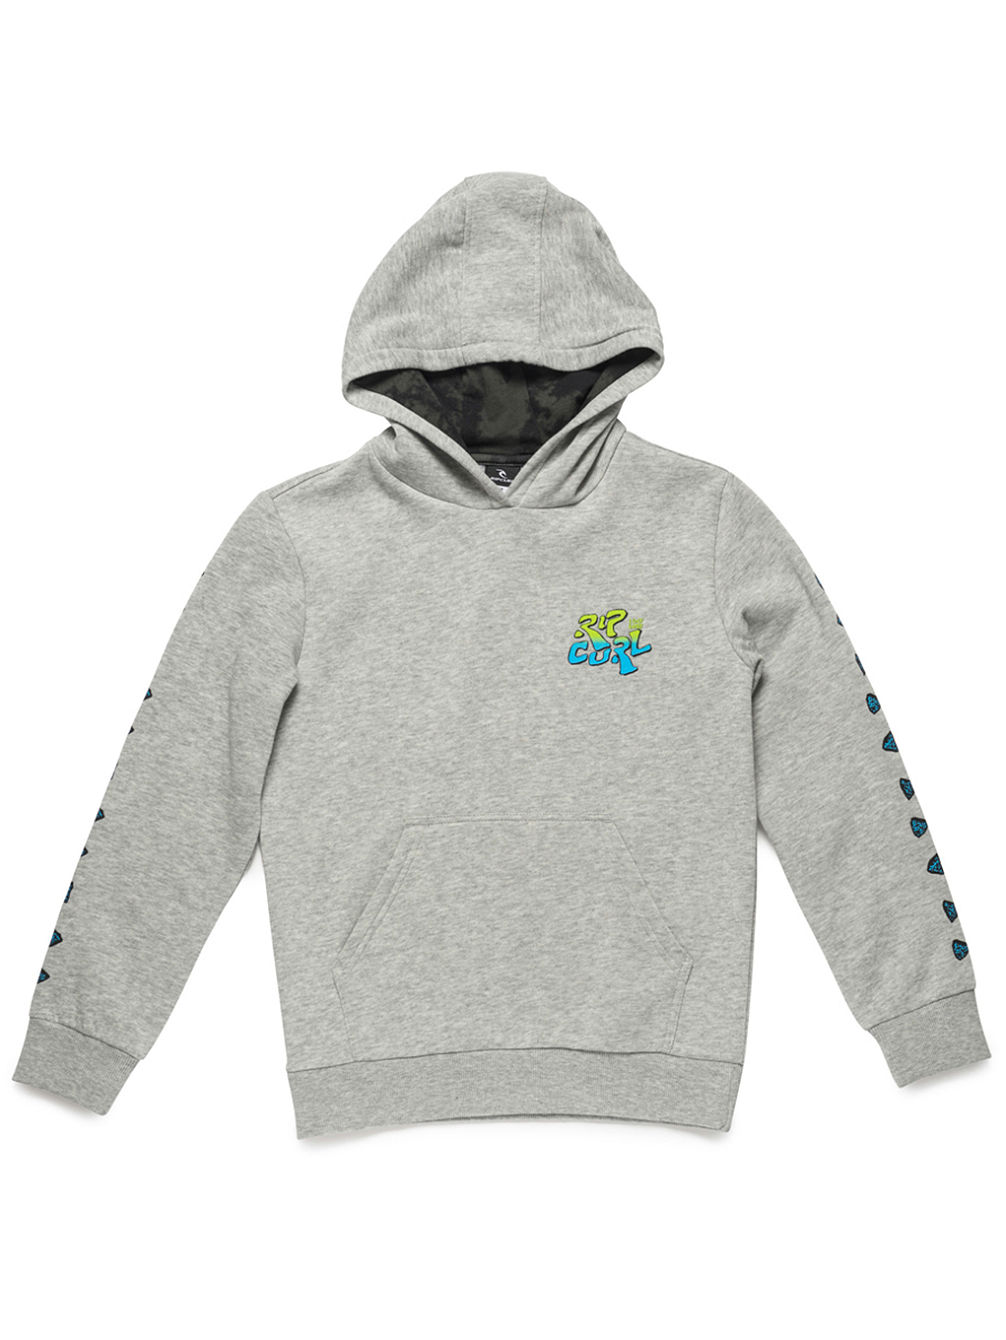 Buy Rip Curl 100% Surf Hoodie Boys online at blue-tomato.com